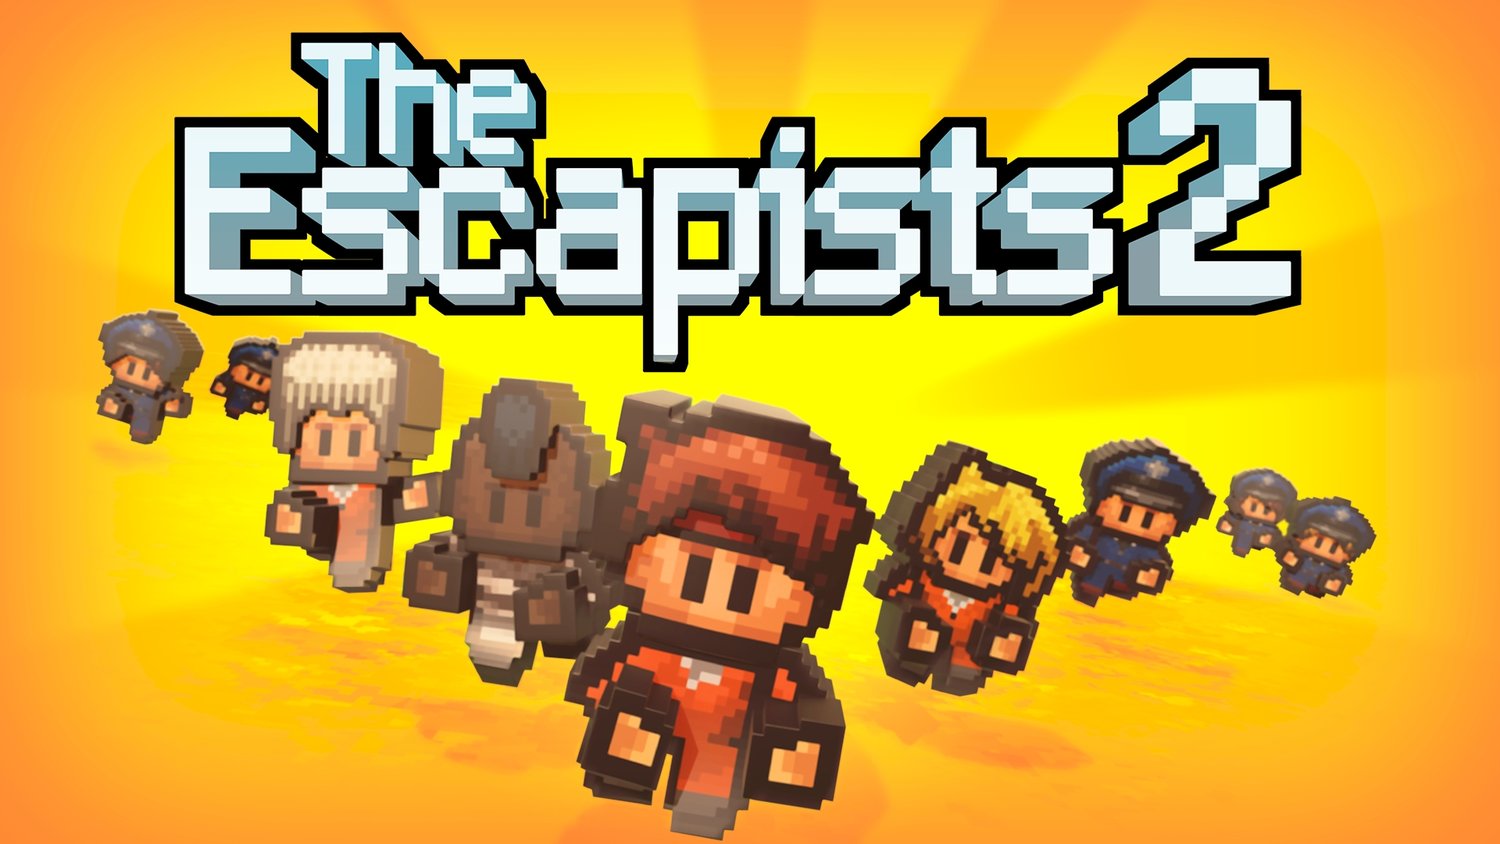 the escapists 2 free download midia fire